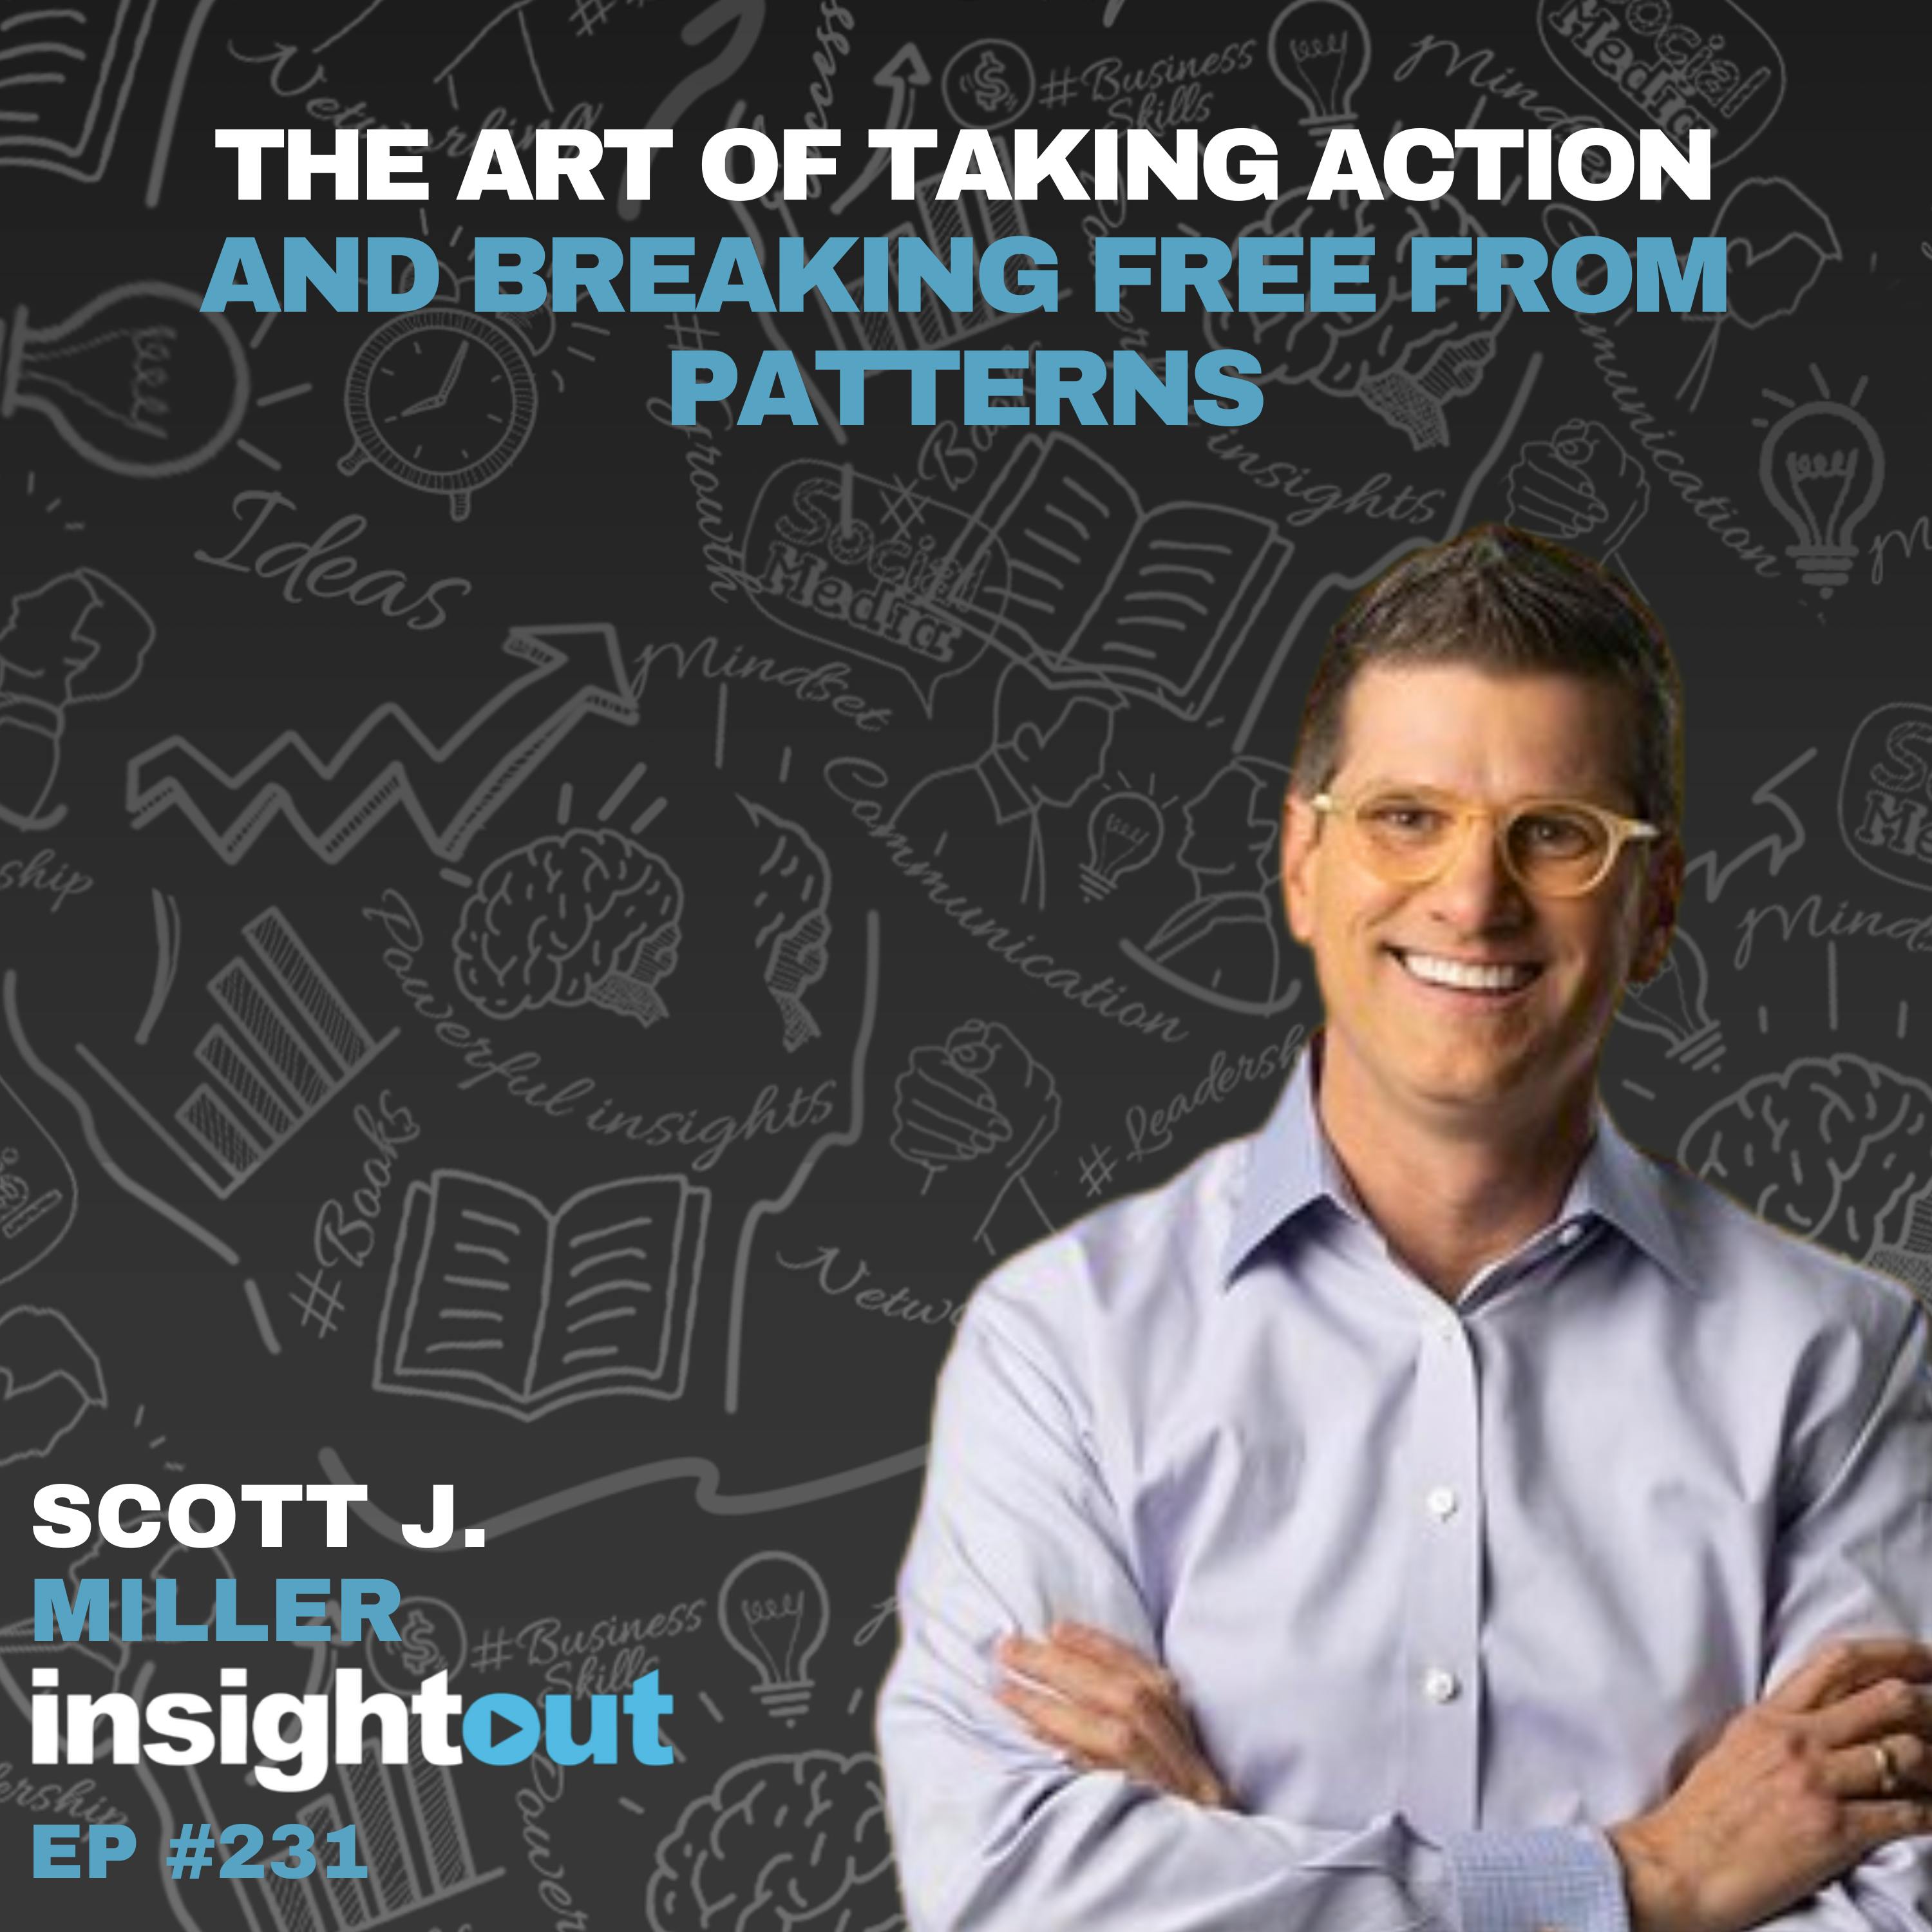 The Art of Taking Action and Breaking Free from Patterns - Scott J. Miller